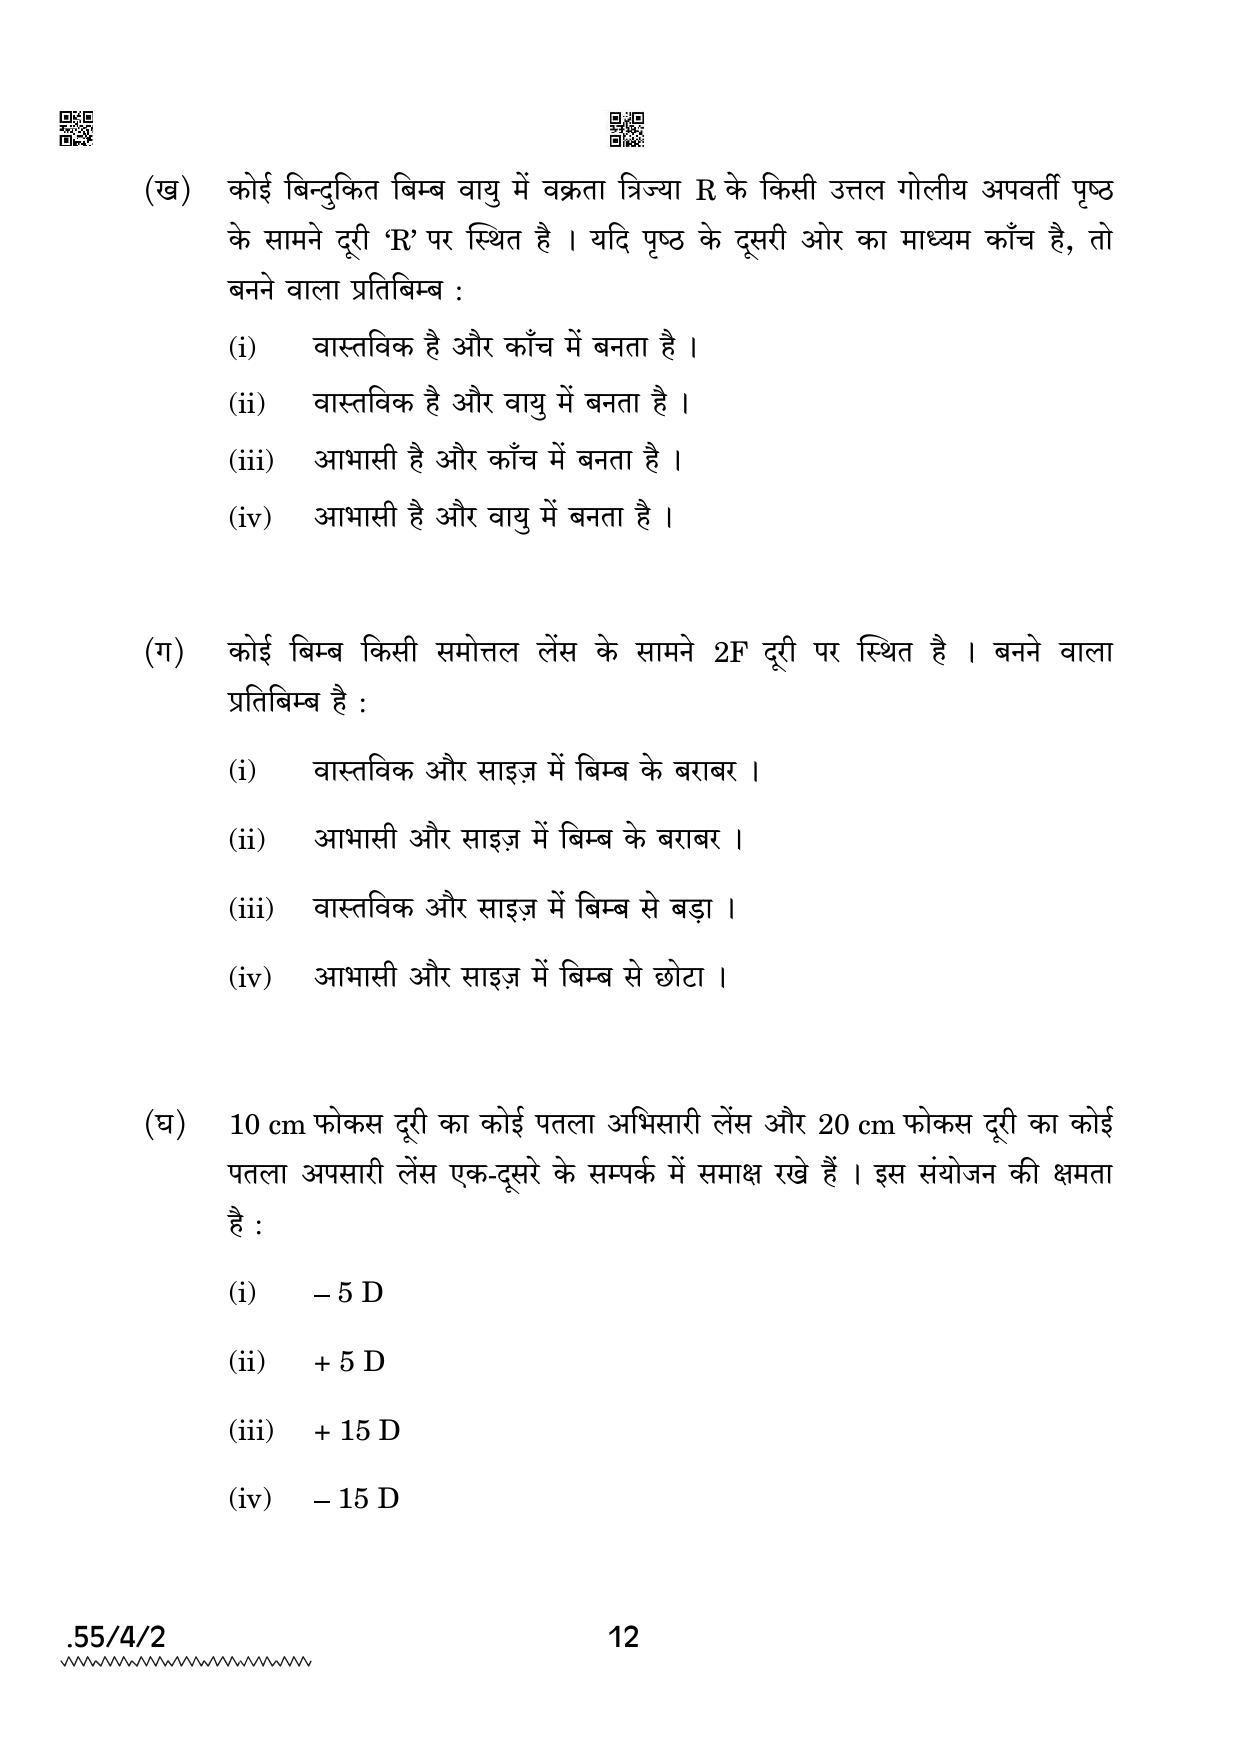 CBSE Class 12 55-4-2 Physics 2022 Question Paper - Page 12